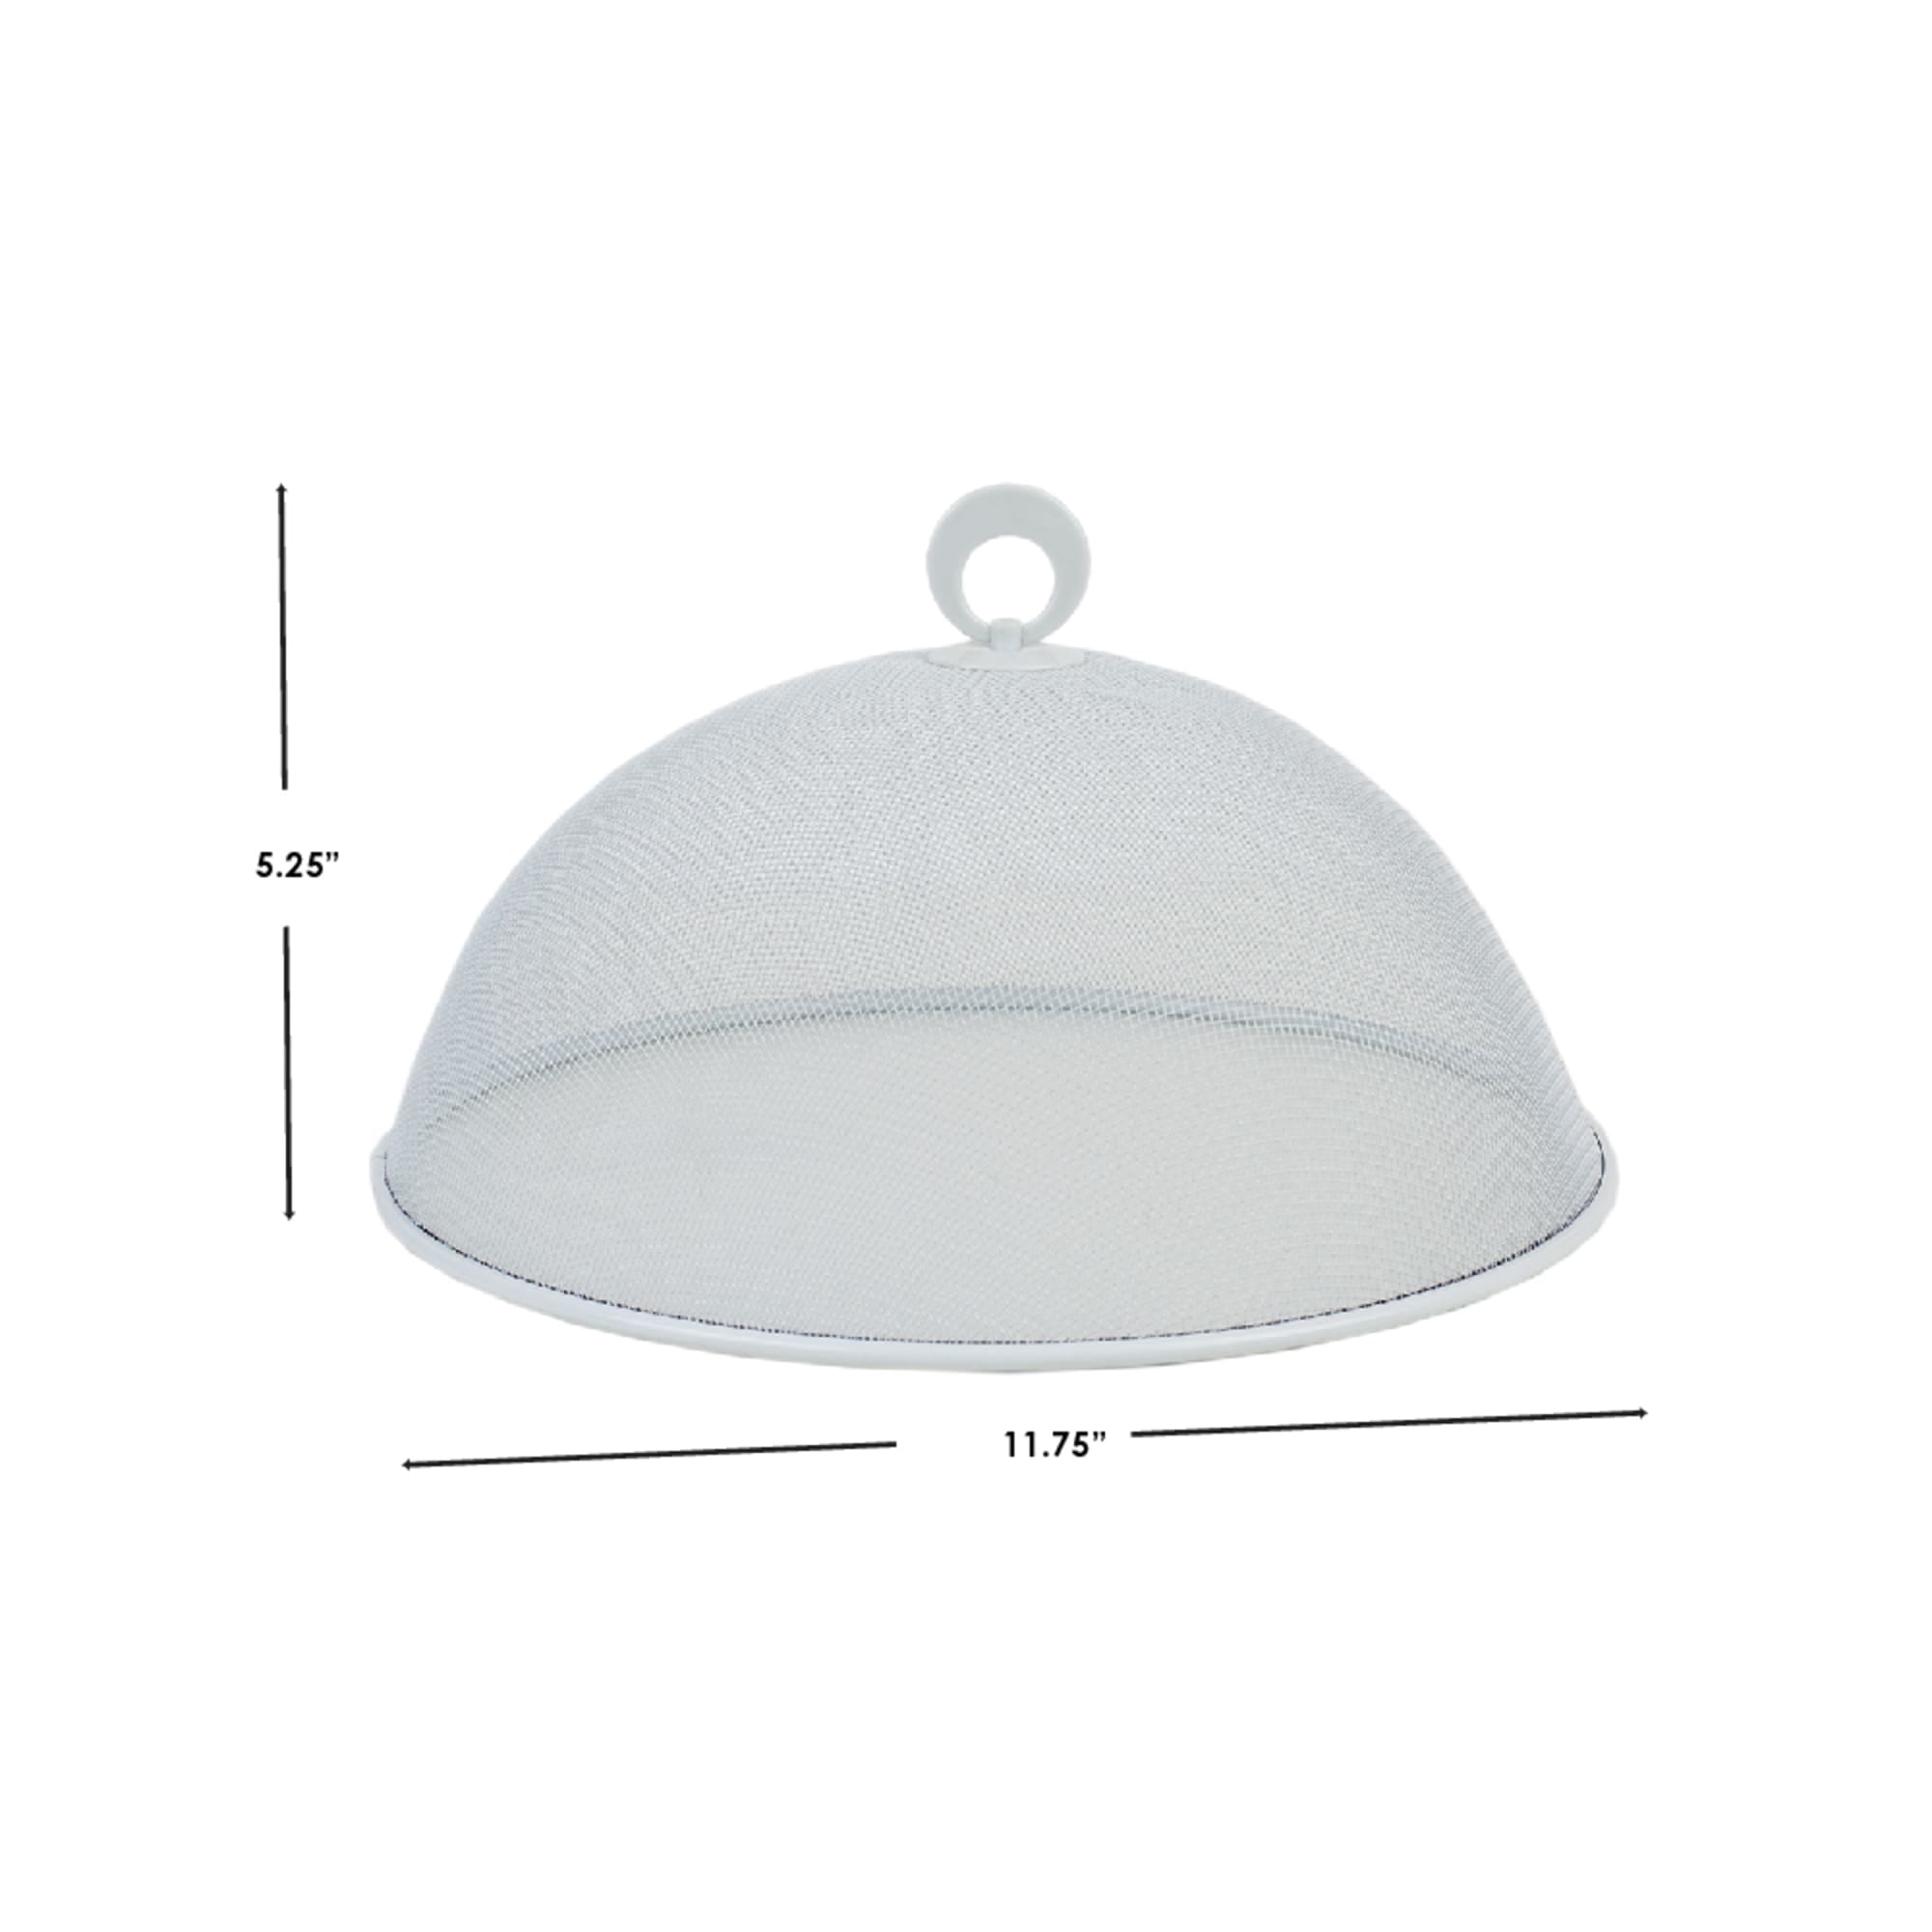 Home Basics Round Mesh Metal Food Plate Cover, White $2.00 EACH, CASE PACK OF 24